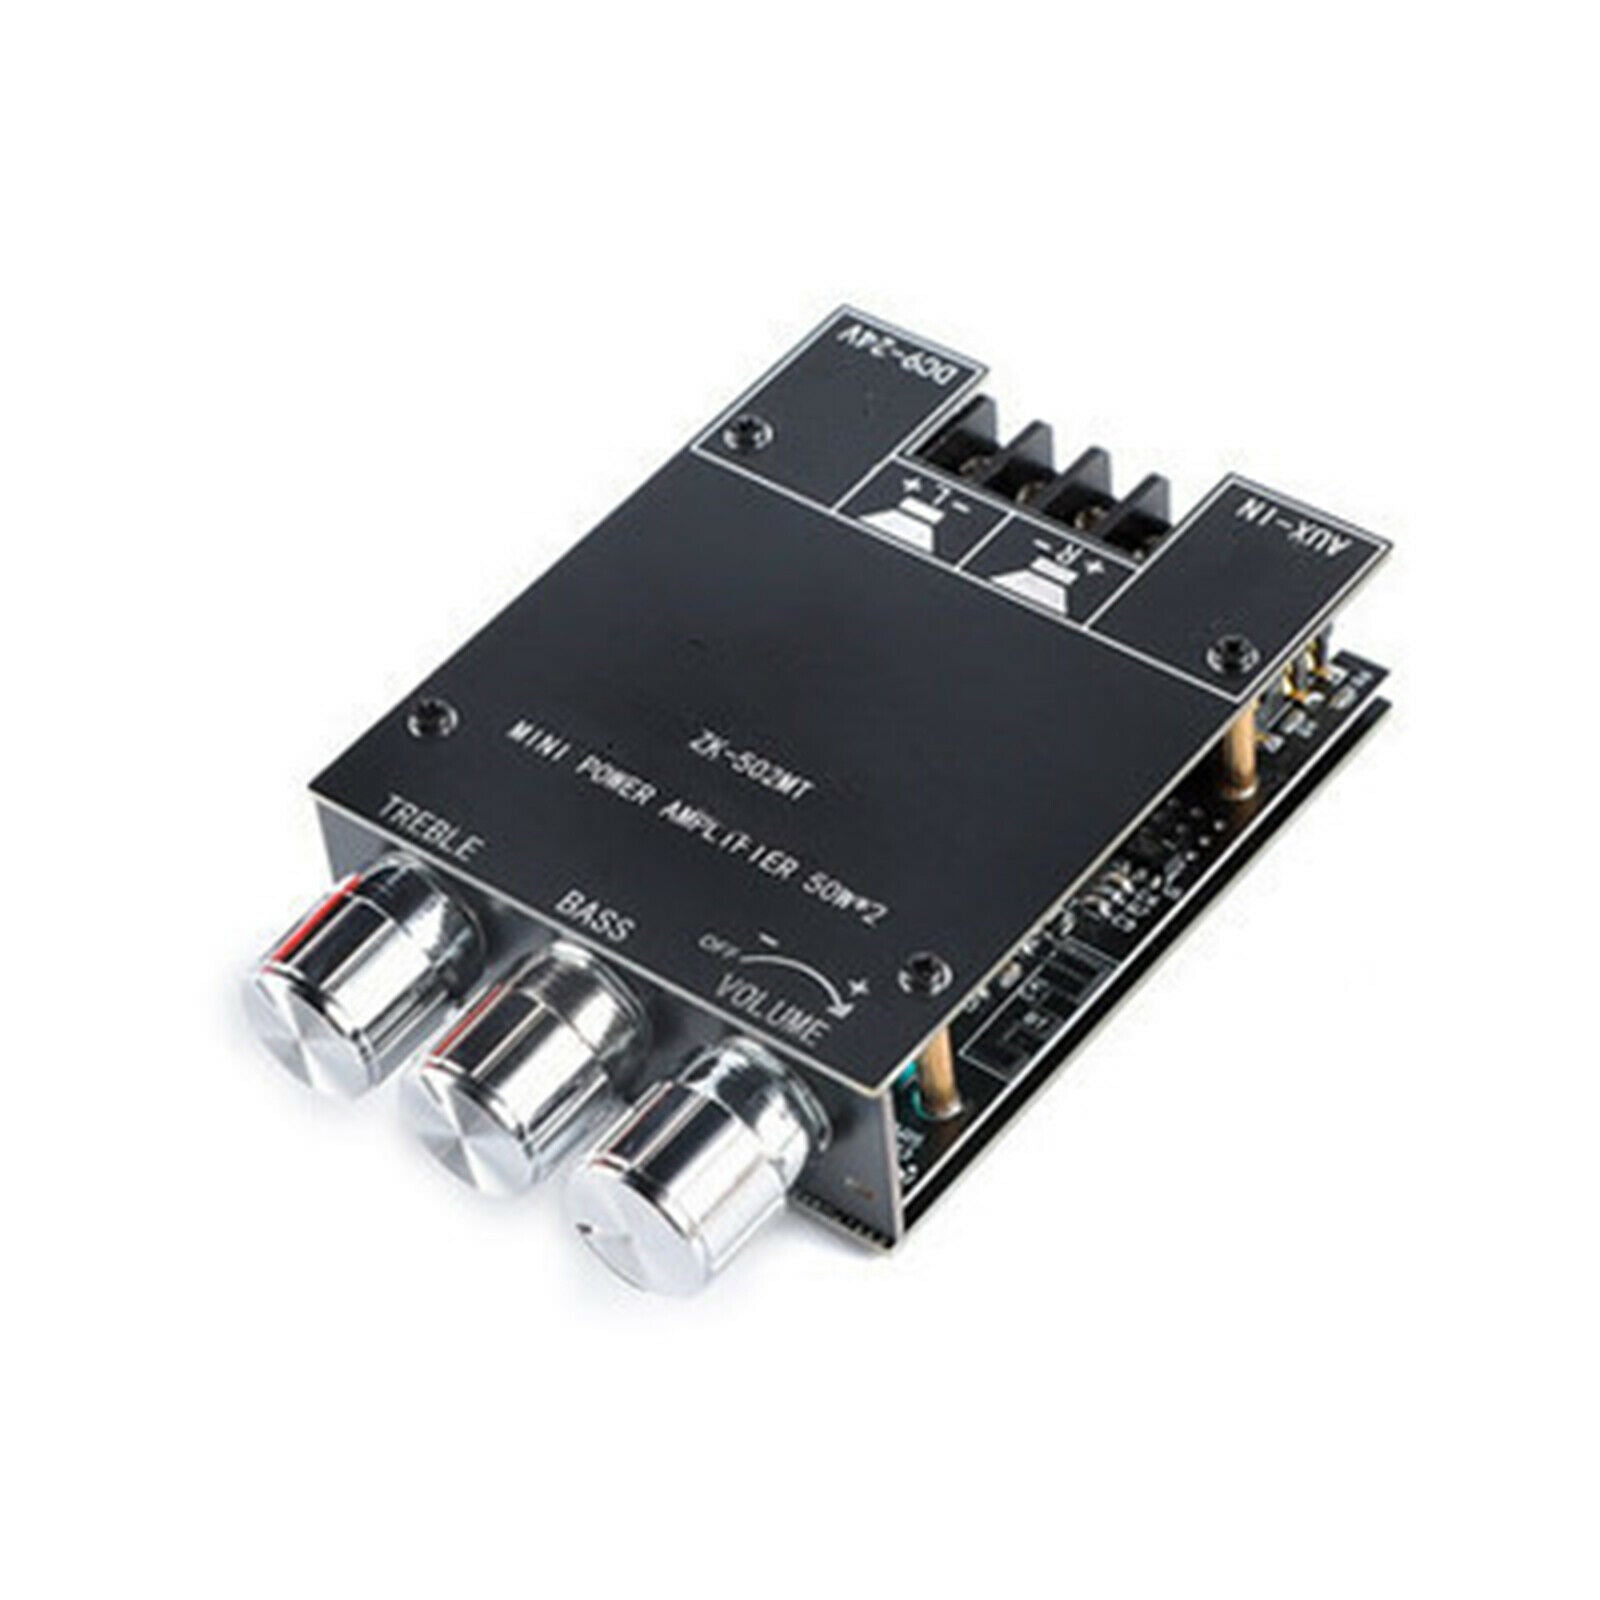 Subwoofer Amplifier Board Plastic Audio Stereo 2.0 Zk-502MT for Home Theater